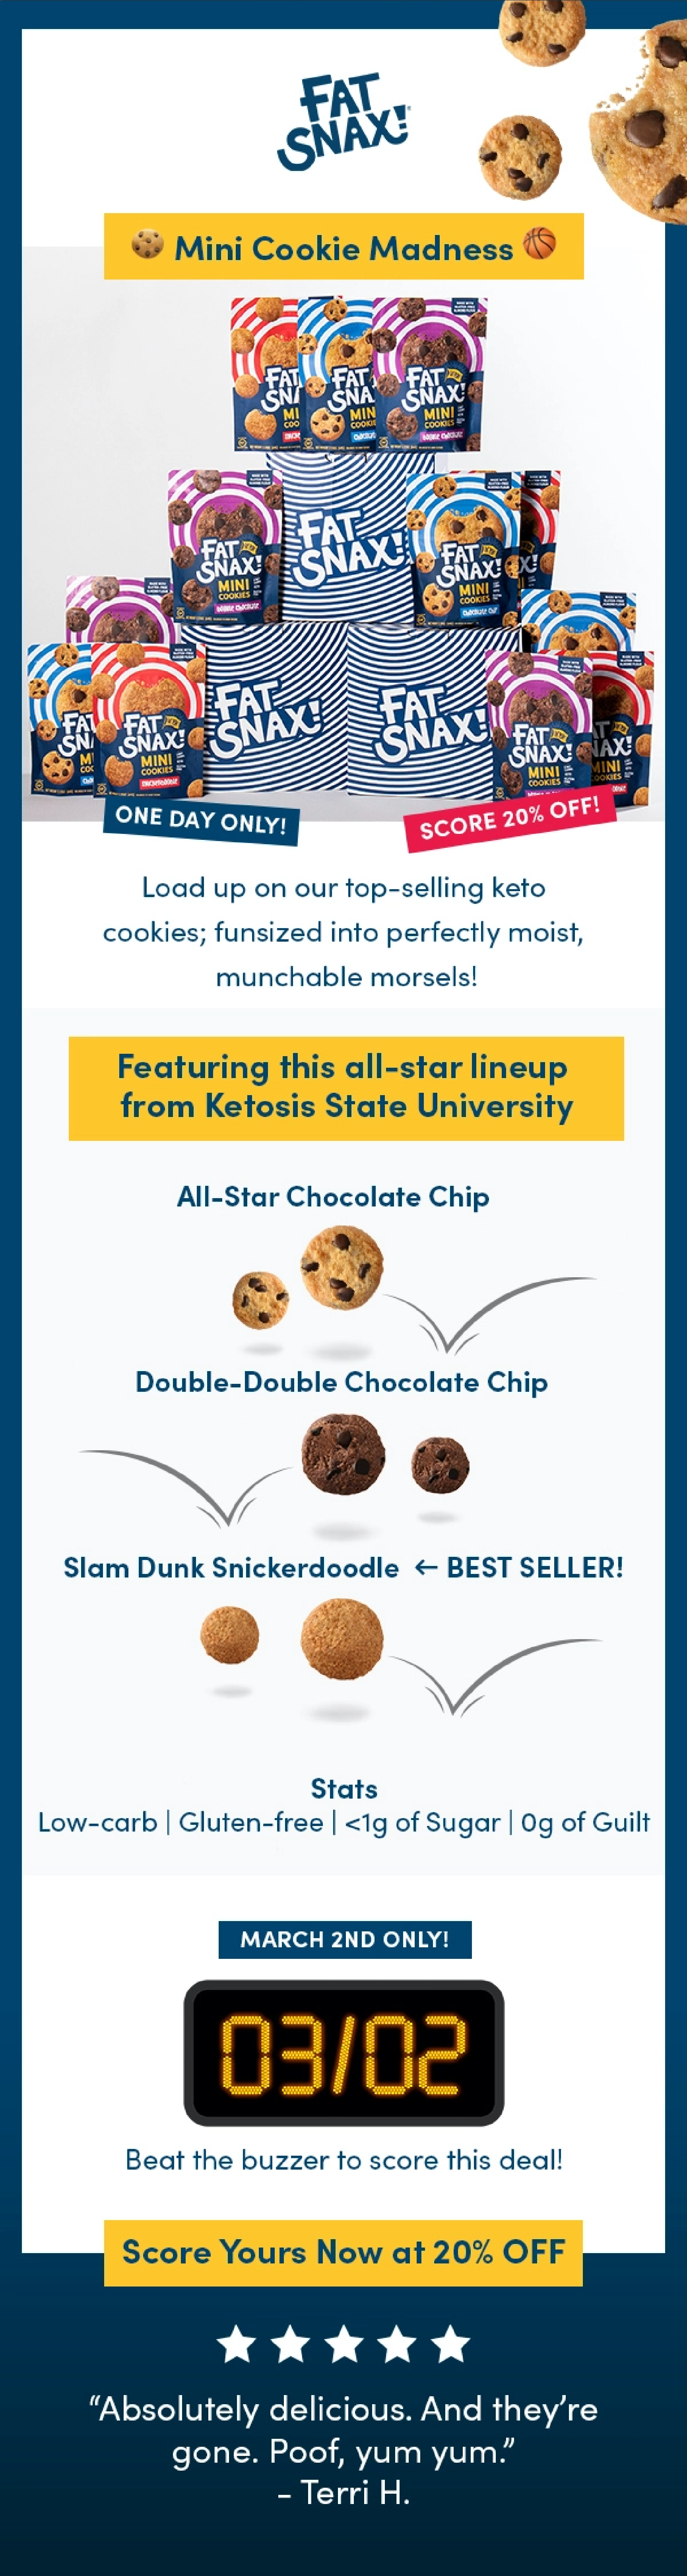 Fat Snax March Madness email design